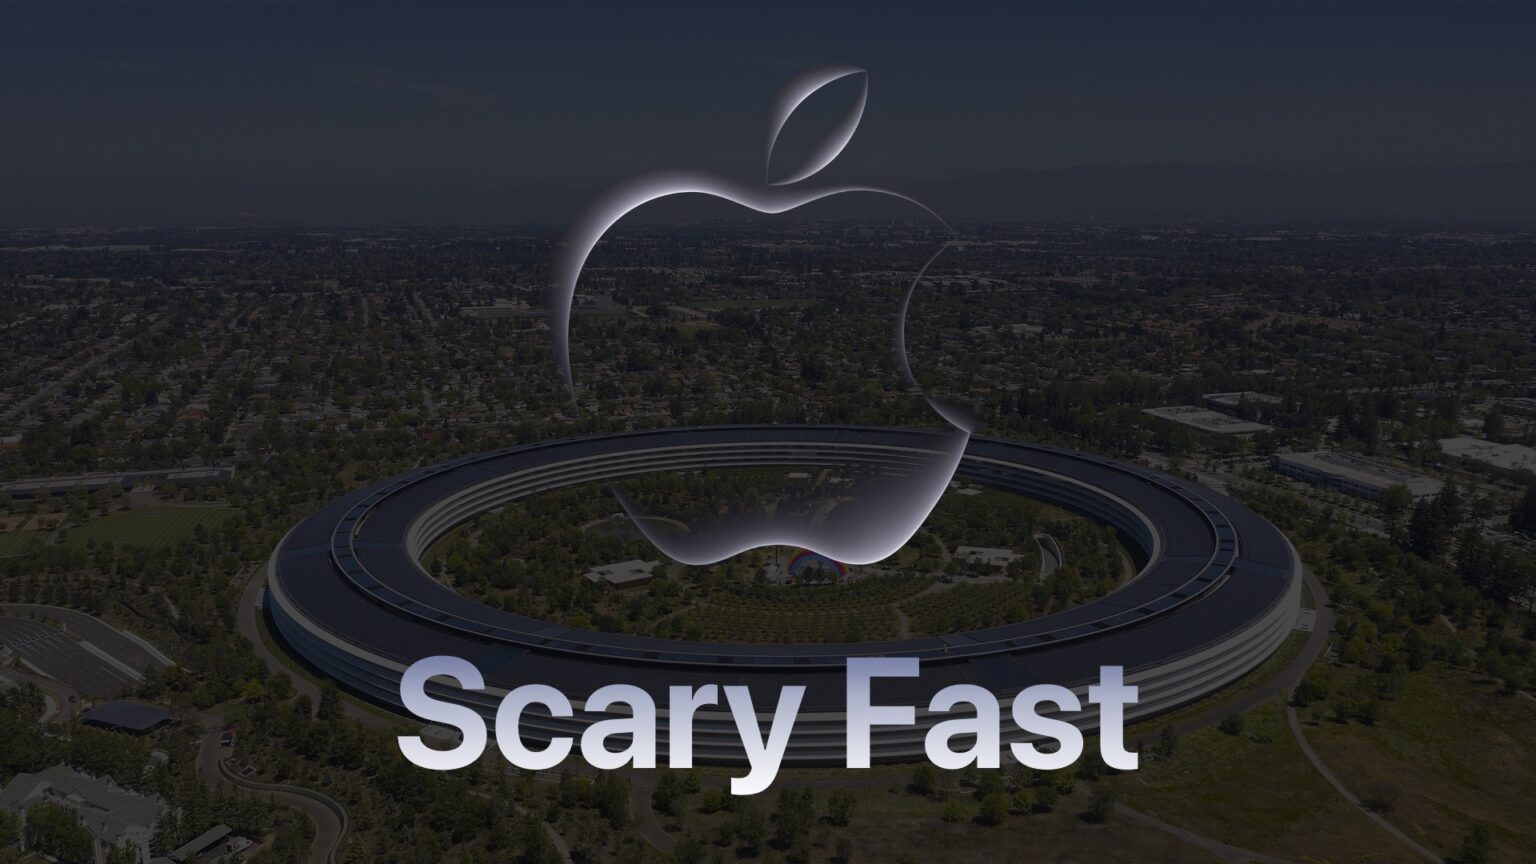 Scary Fast event logo superimposed on aerial photo of Apple Park